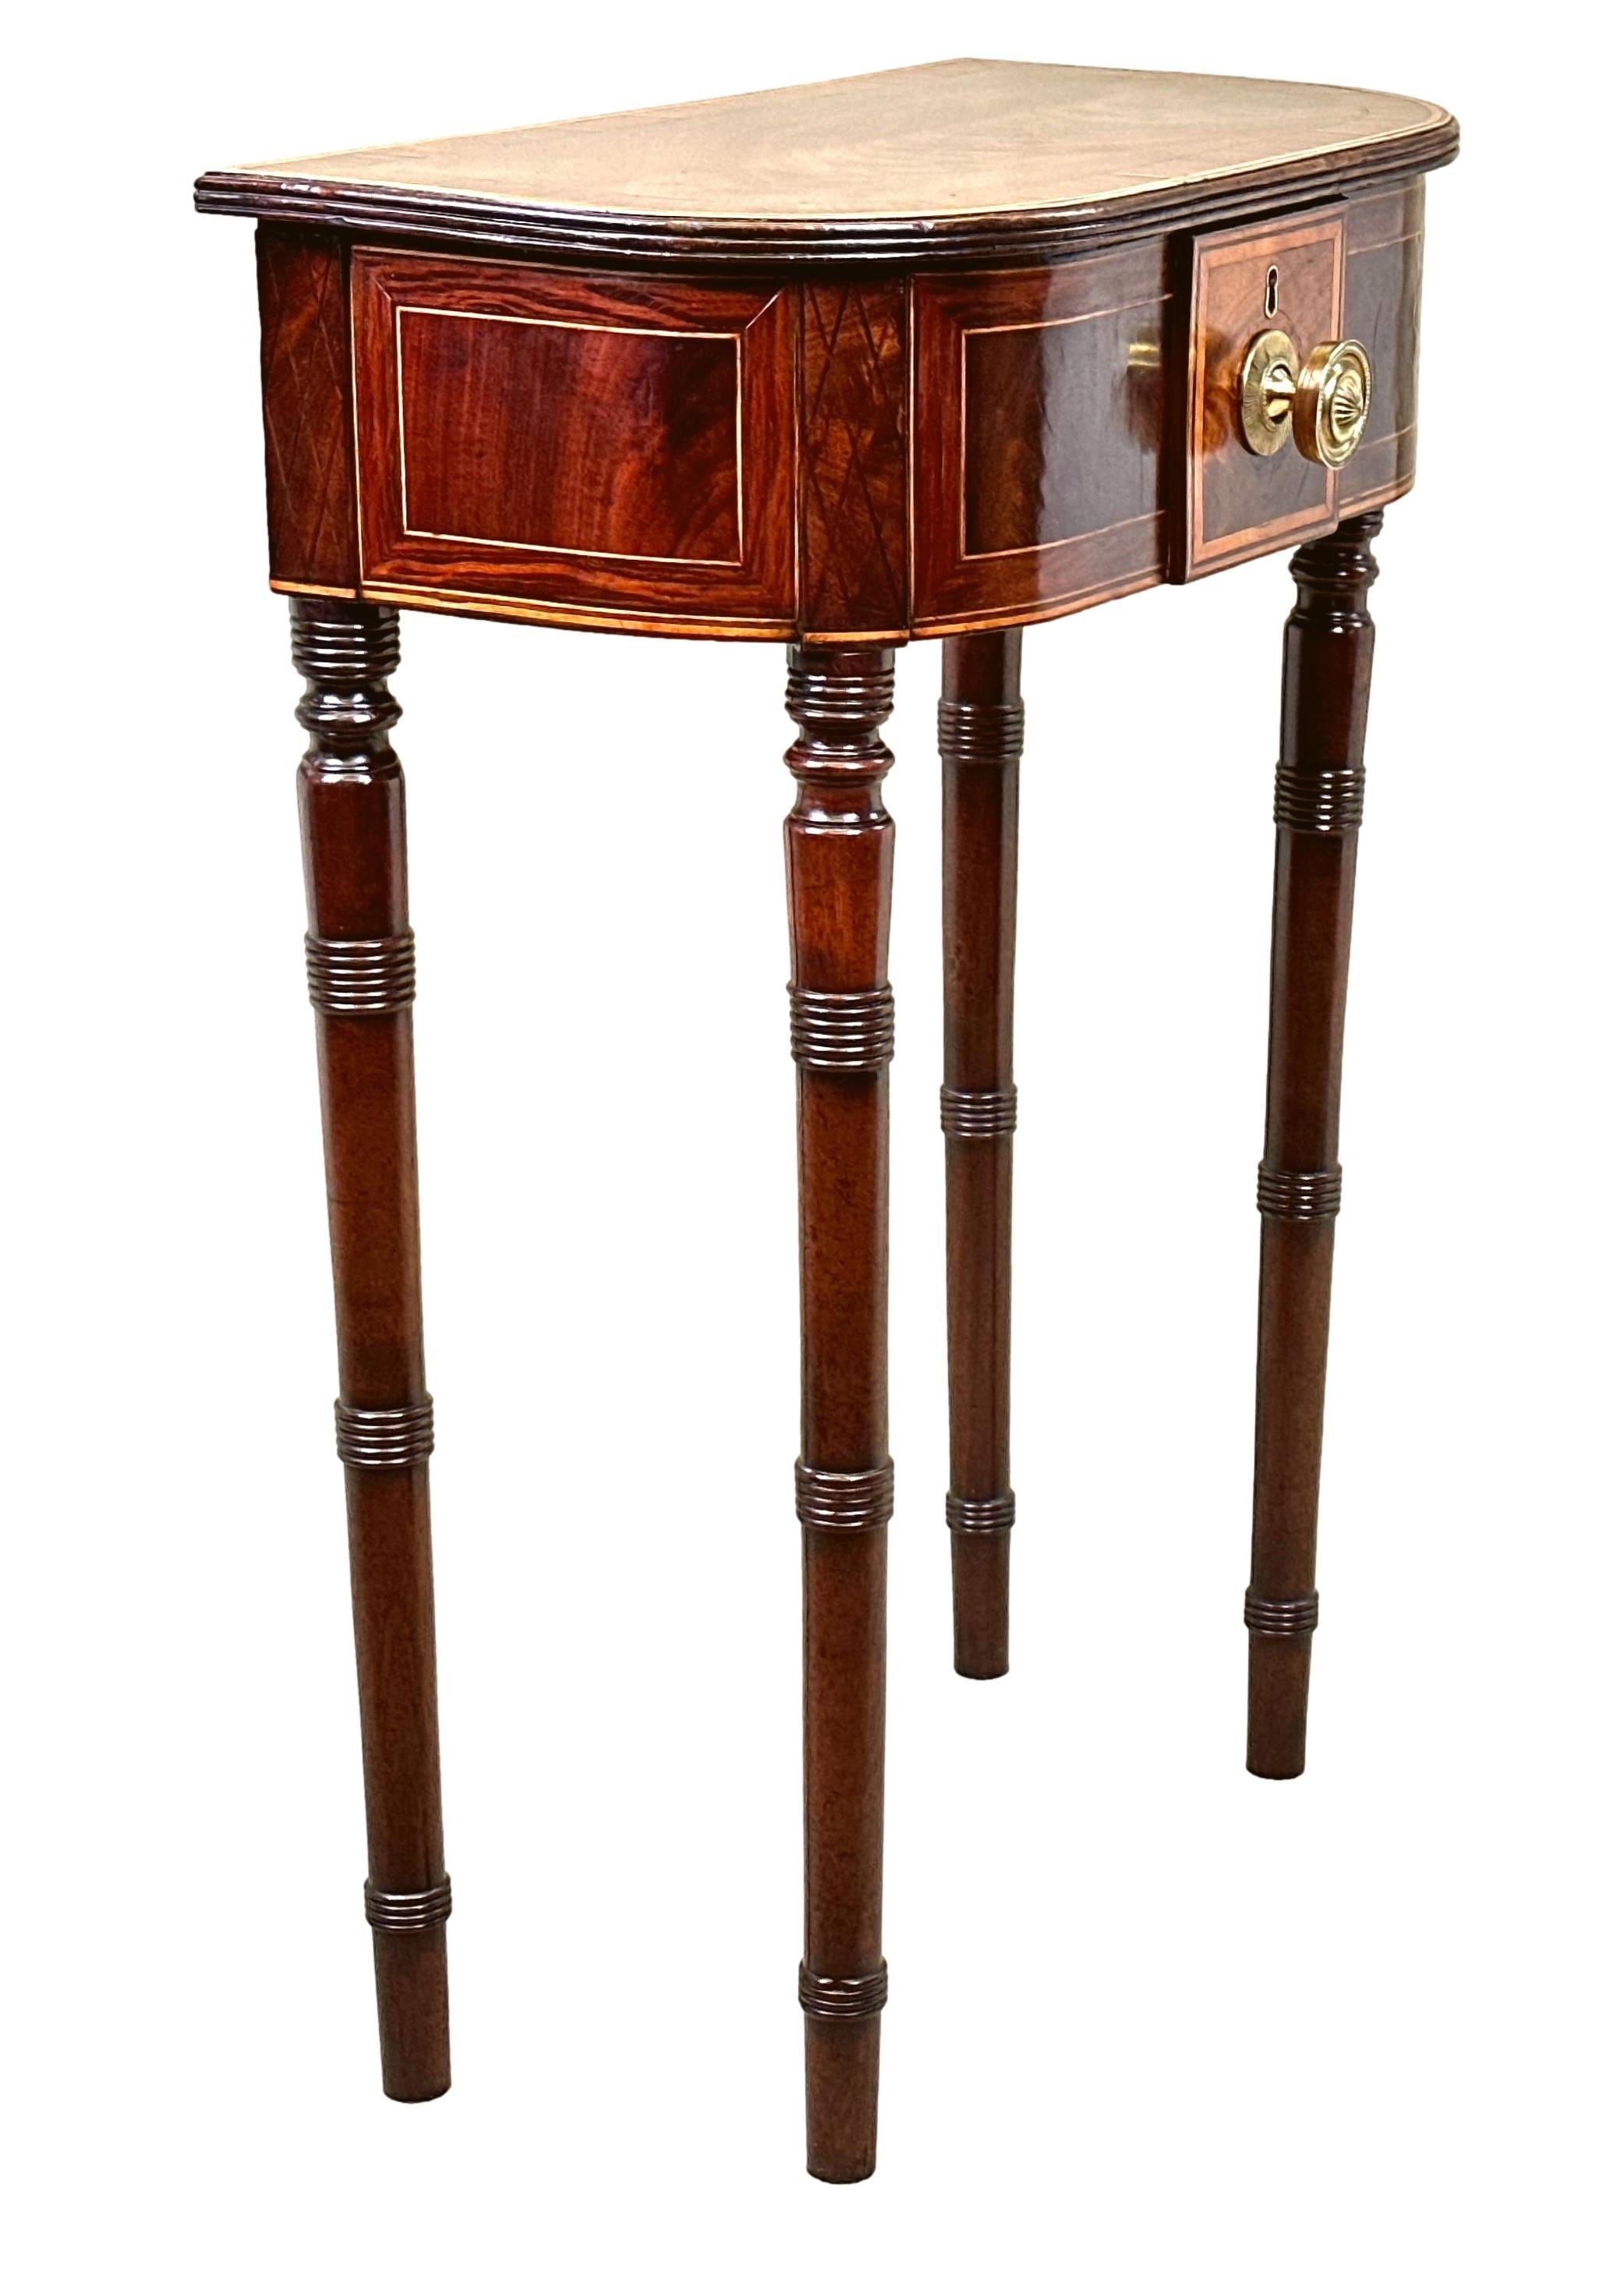 A Very Unusual George III Period Mahogany Occasional Lamp Table, Or Side Table, Of D Shaped Form, Having Well Figured And Crossbanded Hinged Lift Up Top Enclosing Lined Compartment, Over Attractive Deep Frieze With Inlaid Decoration, Raised On